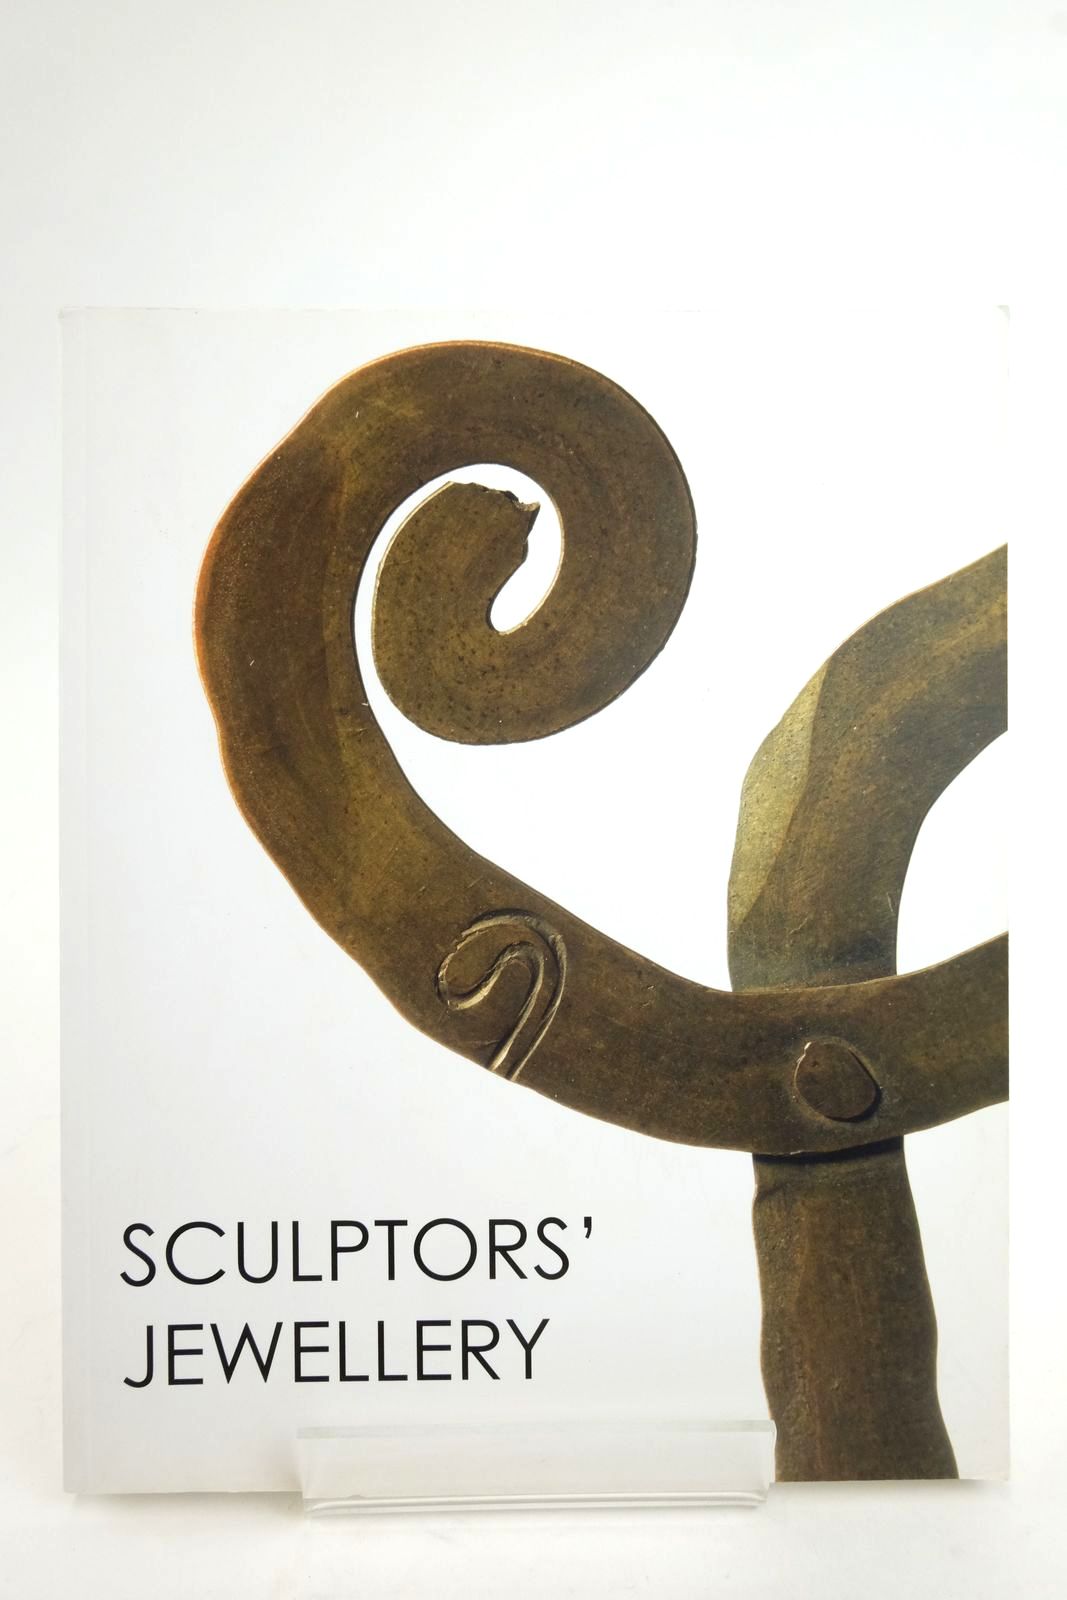 Photo of SCULPTORS' JEWELLERY written by Kingdon, Rungwe published by Pangolin London (STOCK CODE: 2136485)  for sale by Stella & Rose's Books